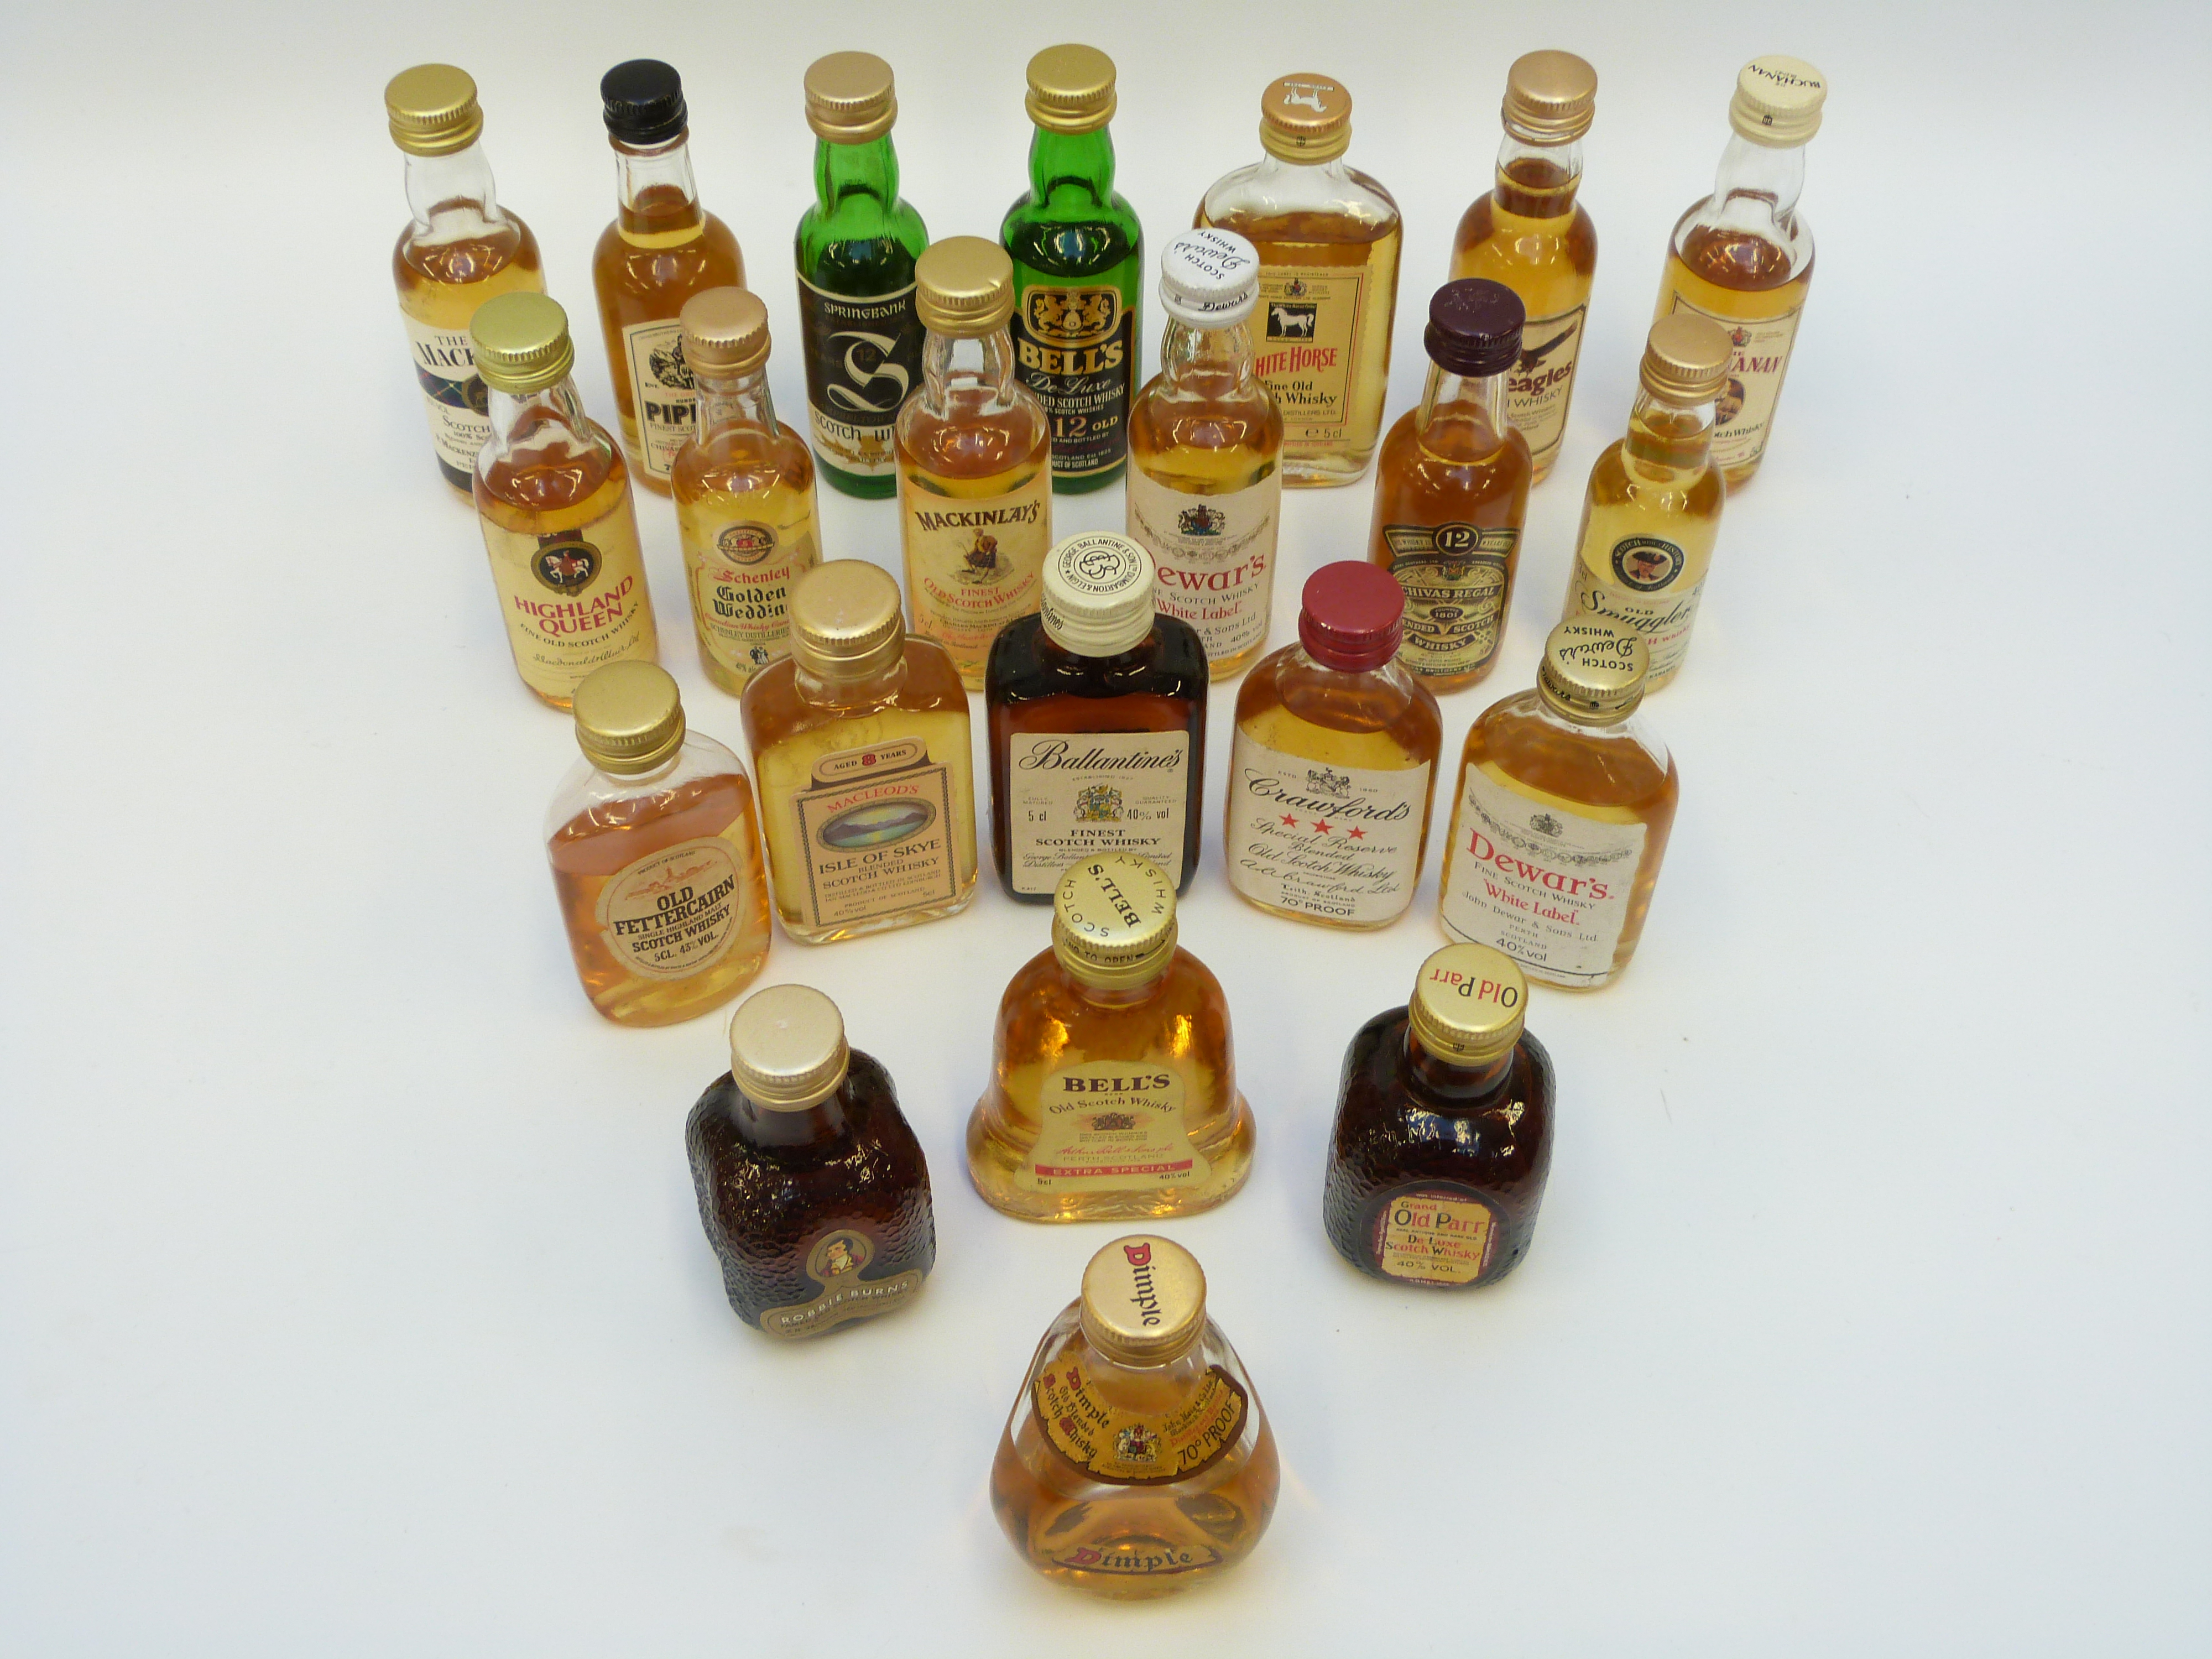 Twenty-two Scotch whisky miniatures including Macleod's 8 year, Dewar's, Dimple, - Image 2 of 8